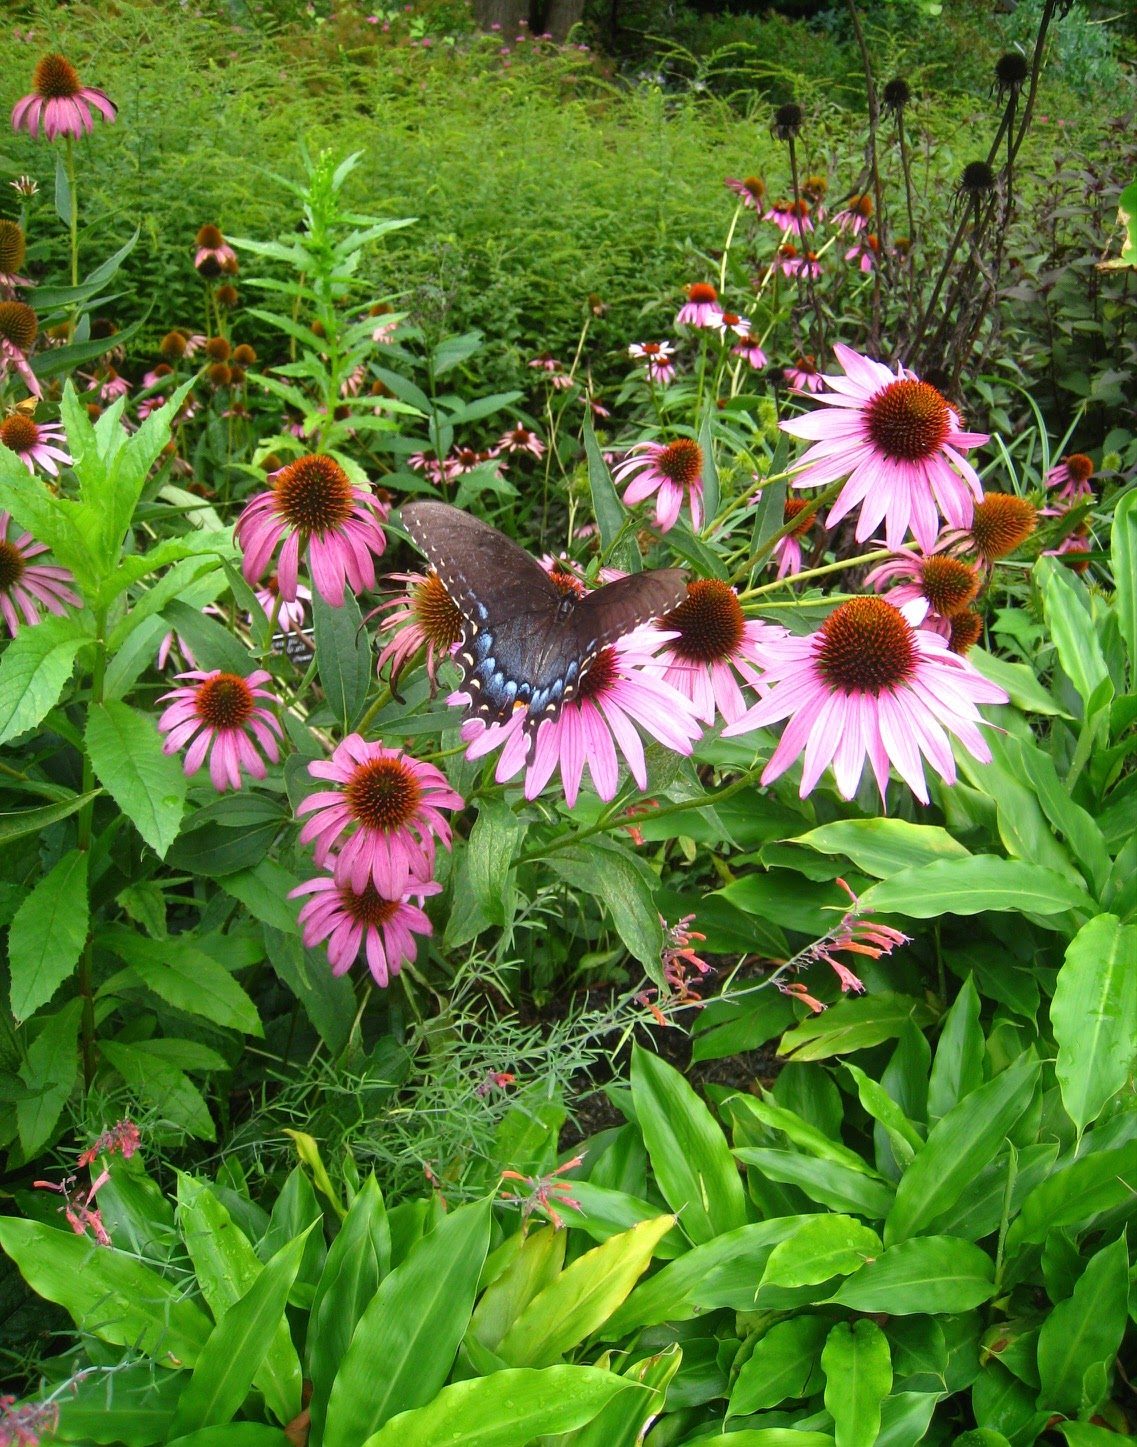 A Black Swallowtail butterfly lands on a Purple Coneflower, enjoying the nectar.